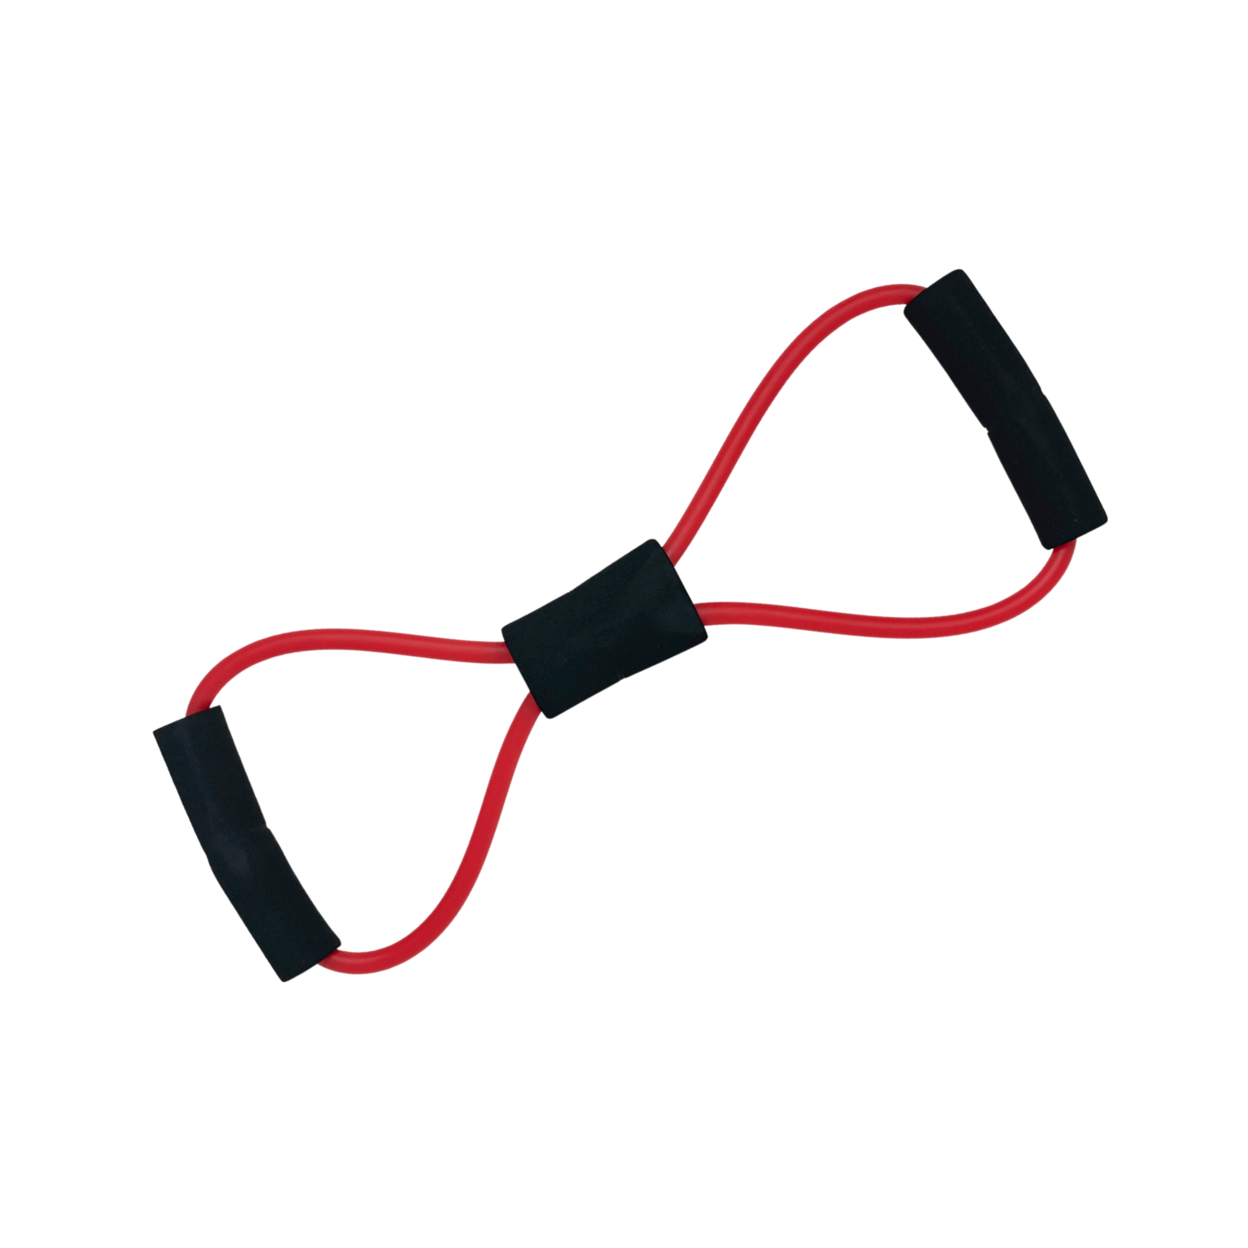 Figure-8 Resistance Band For Strength And Stability Exercises - Red